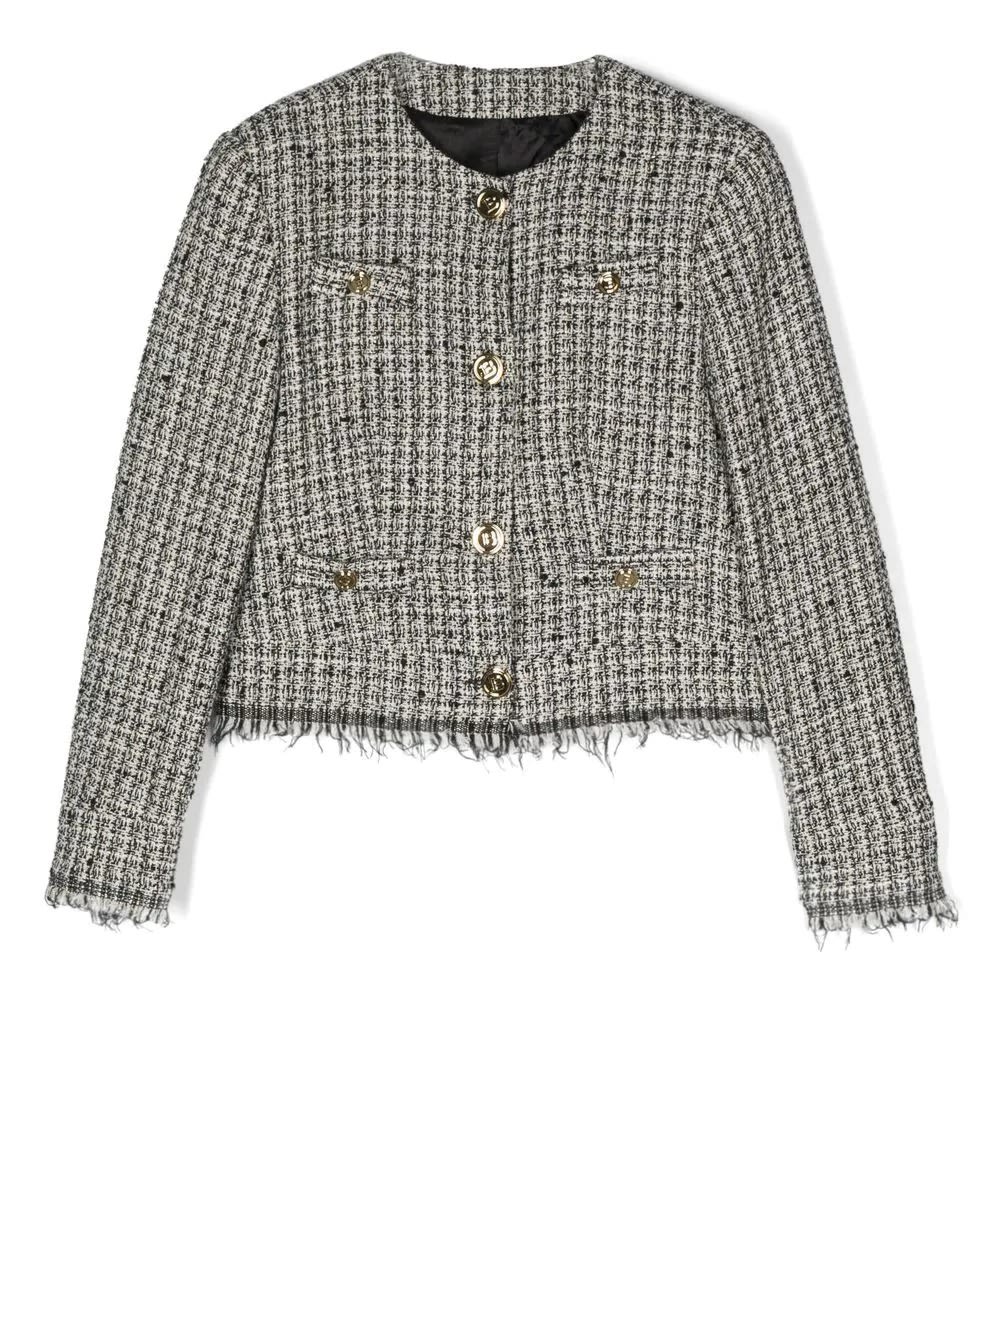 Balmain Kids Blazer In Black And Ivory Tweed With Gold Embossed Buttons